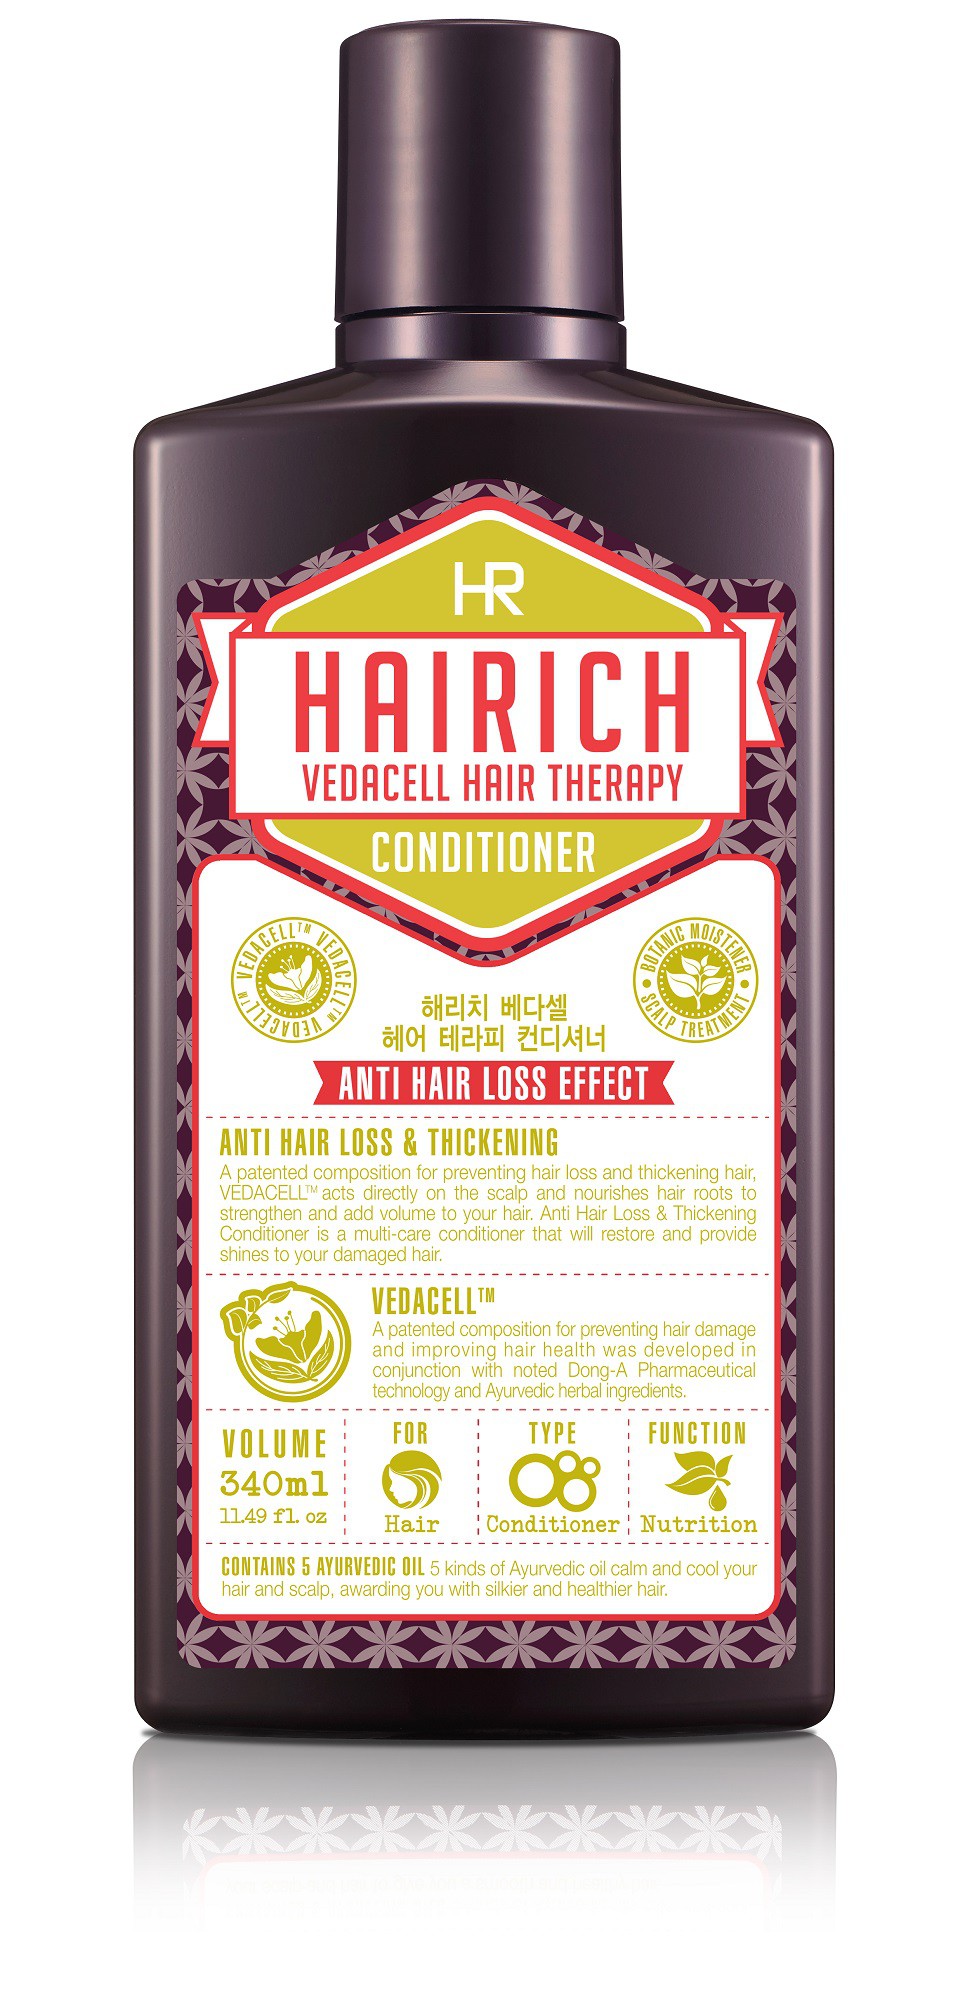 Hairich Vedacell Hair Therapy Conditioner 340ml  - 1720 ..jpg